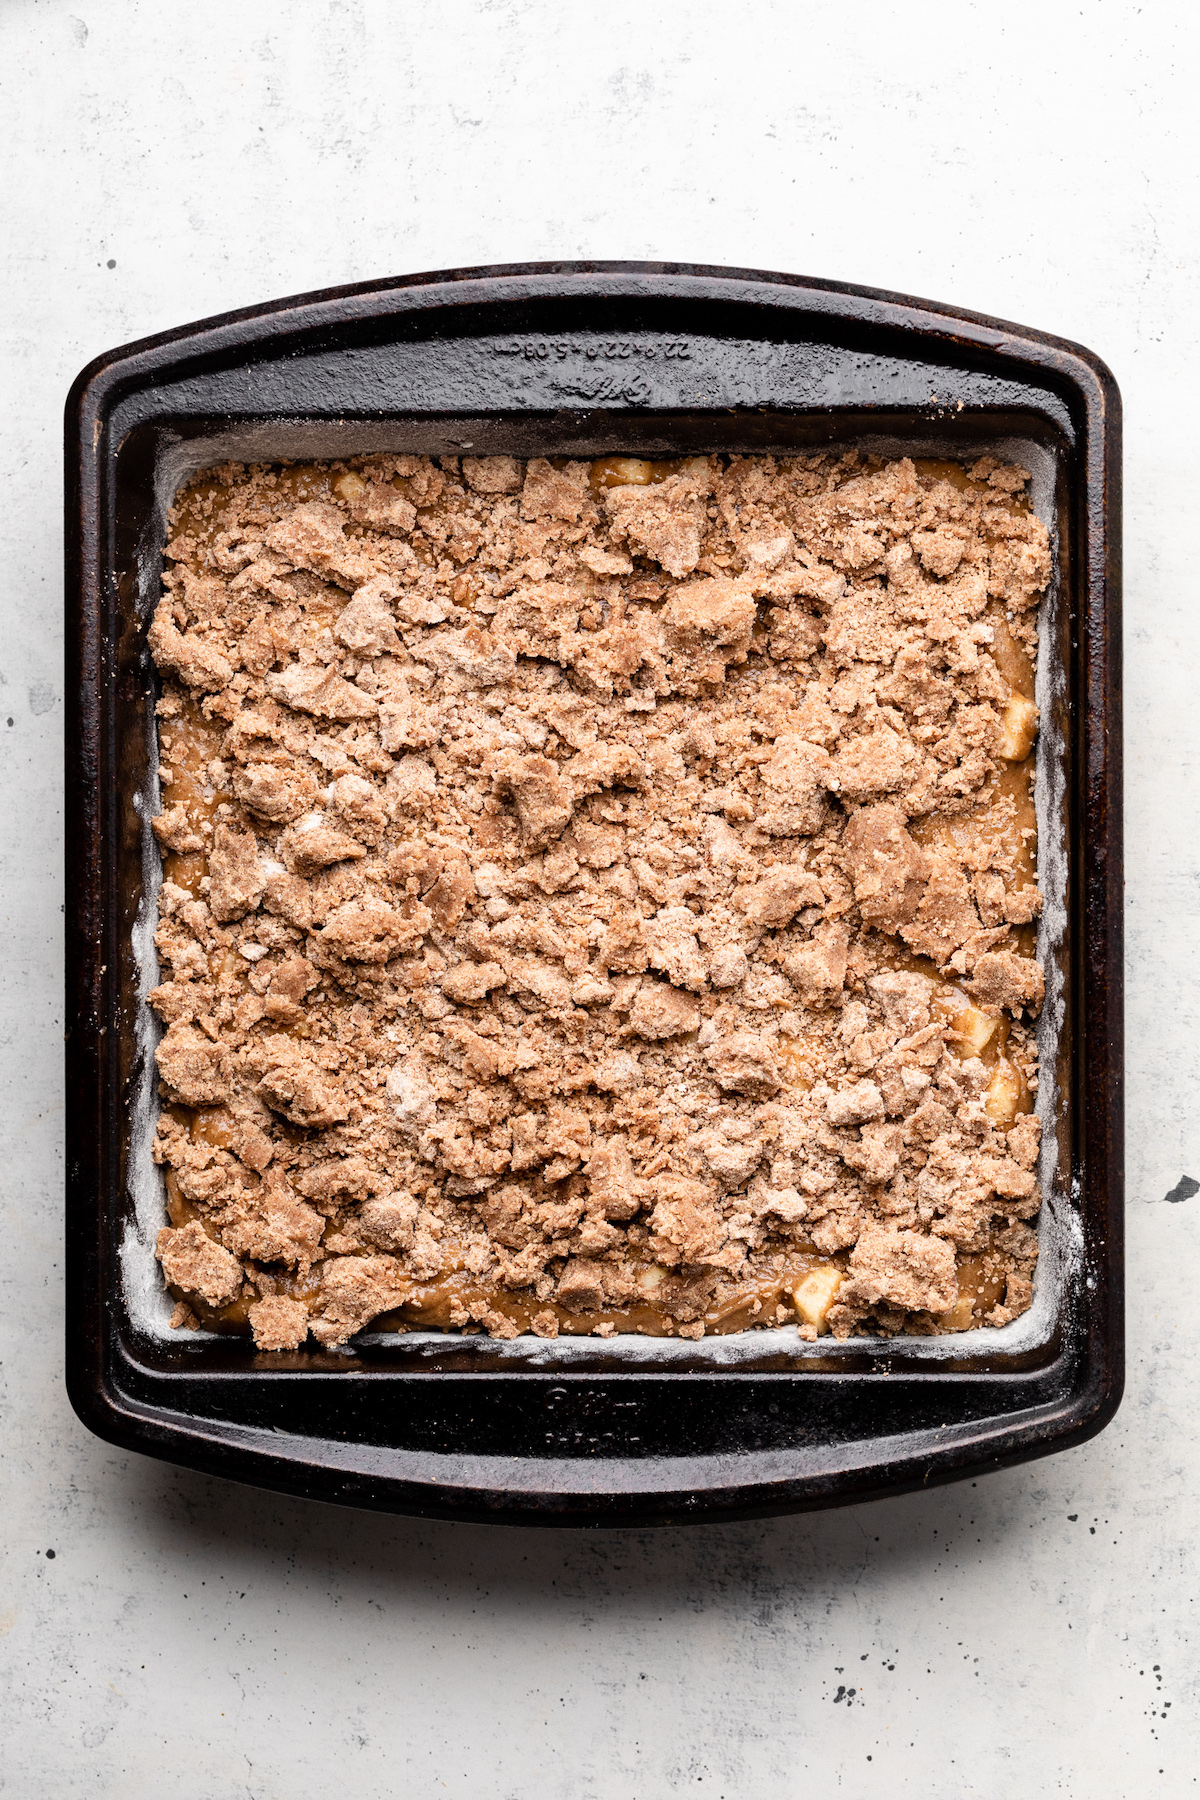 Coffee cake batter in a dark, square baking dish, topped with crumble topping.